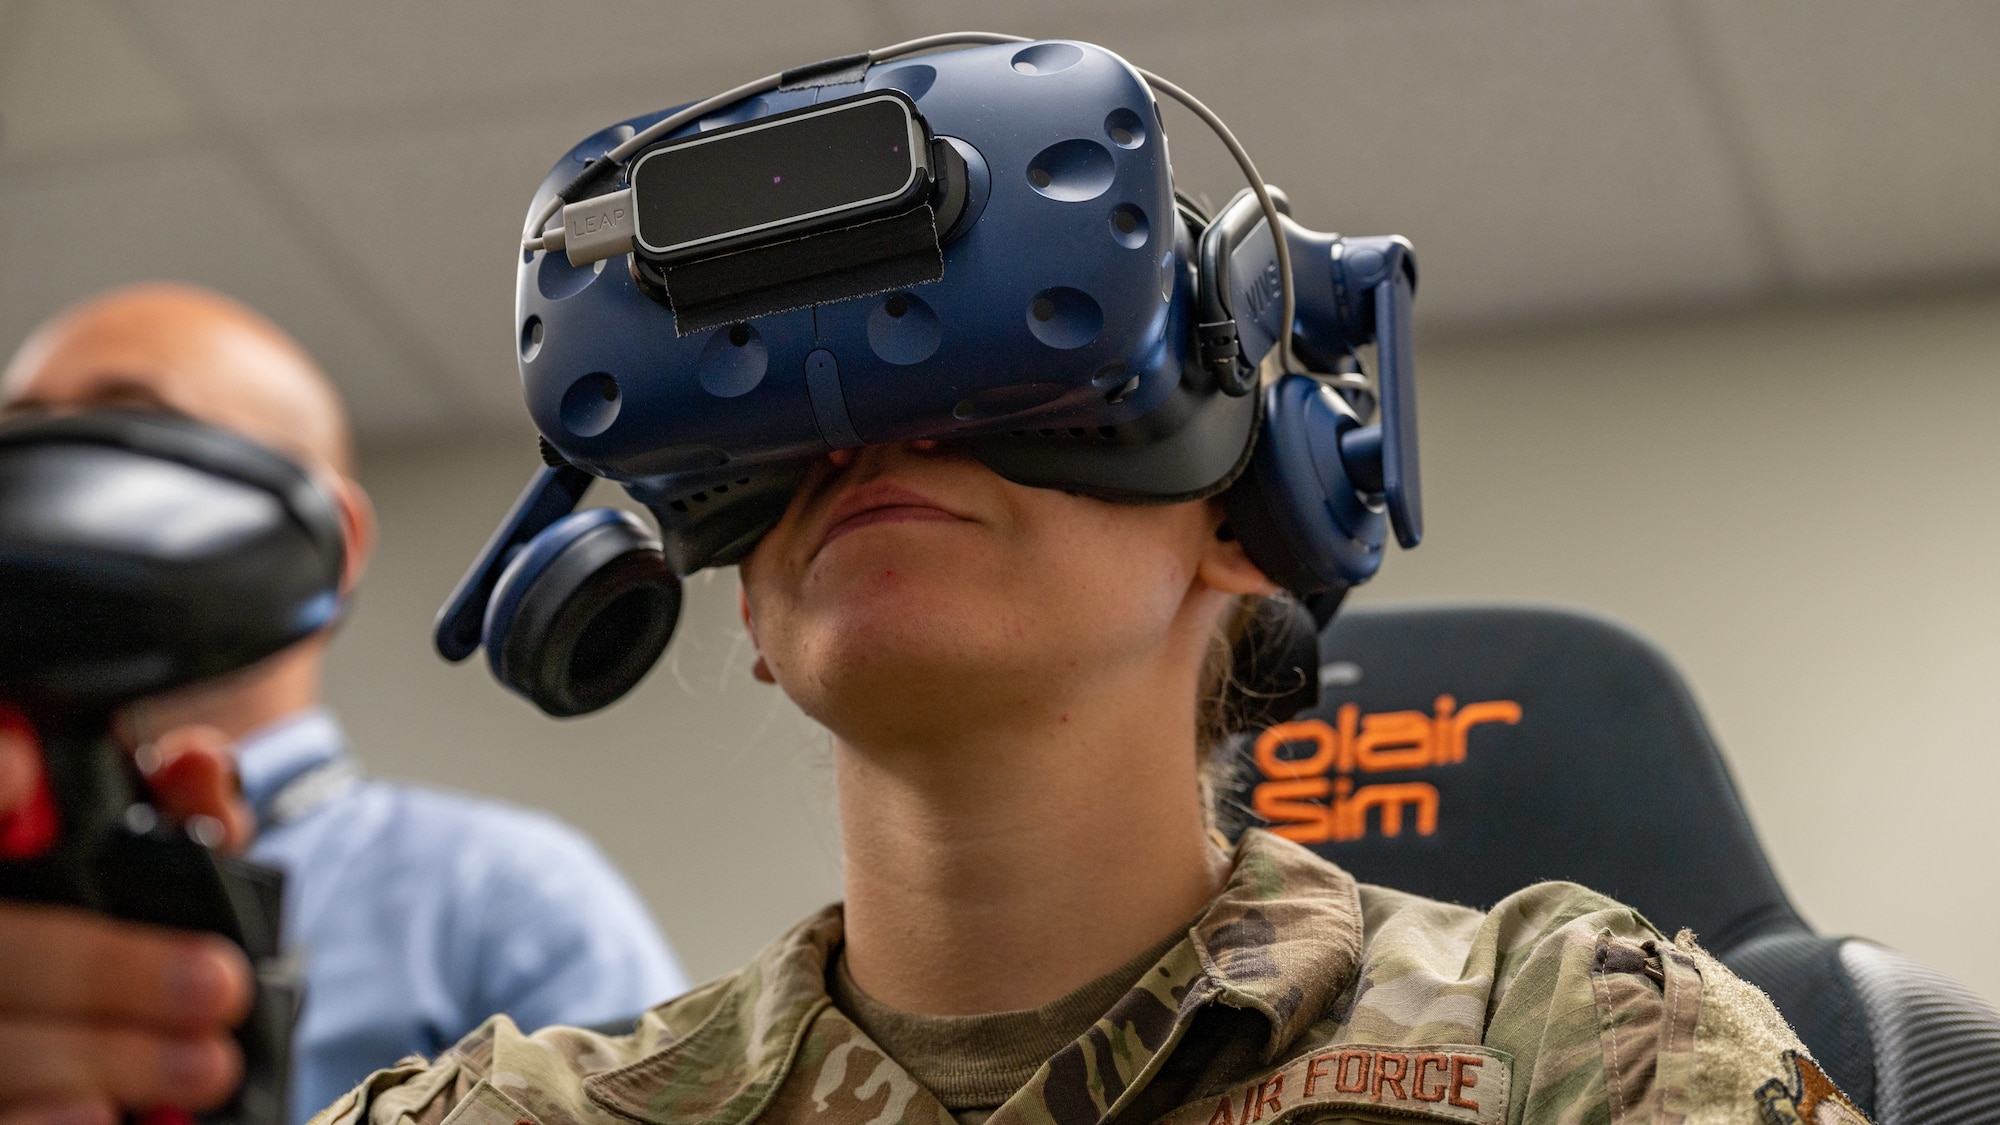 Air Force ROTC Academy Cadet Hannah Cunningham learns how to fly an F-15E Strike Eagle in a virtual reality training simulation at Seymour Johnson Air Force Base, North Carolina, August 3, 2023. Under the guidance of Capt. Victoria Beck, 334th Fighter Squadron weapons safety officer and Capt. Cecilia “Feisty” Tuma, a pilot assigned to the 333rd Fighter Squadron, the cadets attempted to take-off, attack both airborne and land targets and land during the simulation. (U.S. Air Force photo by Airman 1st Class Leighton Lucero)